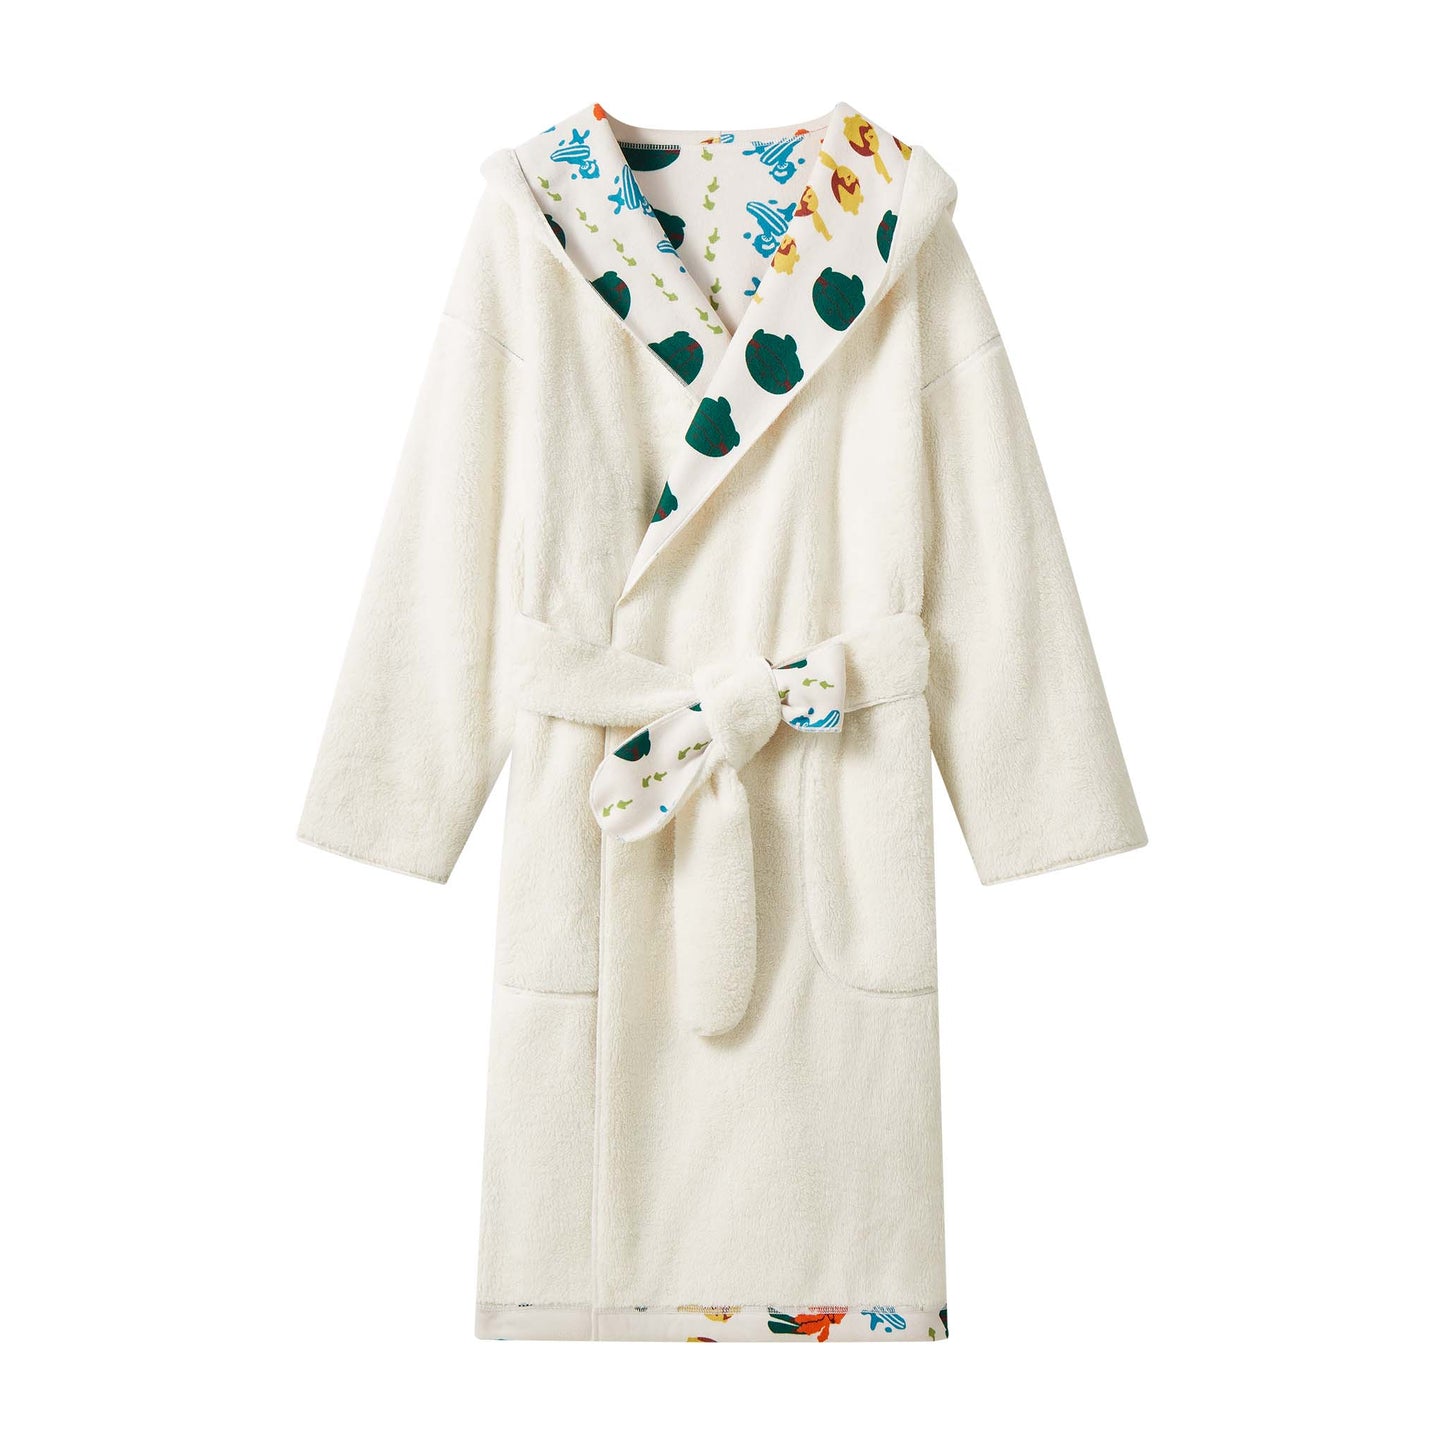 Compfy Dual Fleece Unisex Loungewear | Fluffy Gown Bath Robe | Wairliving Reversible Design